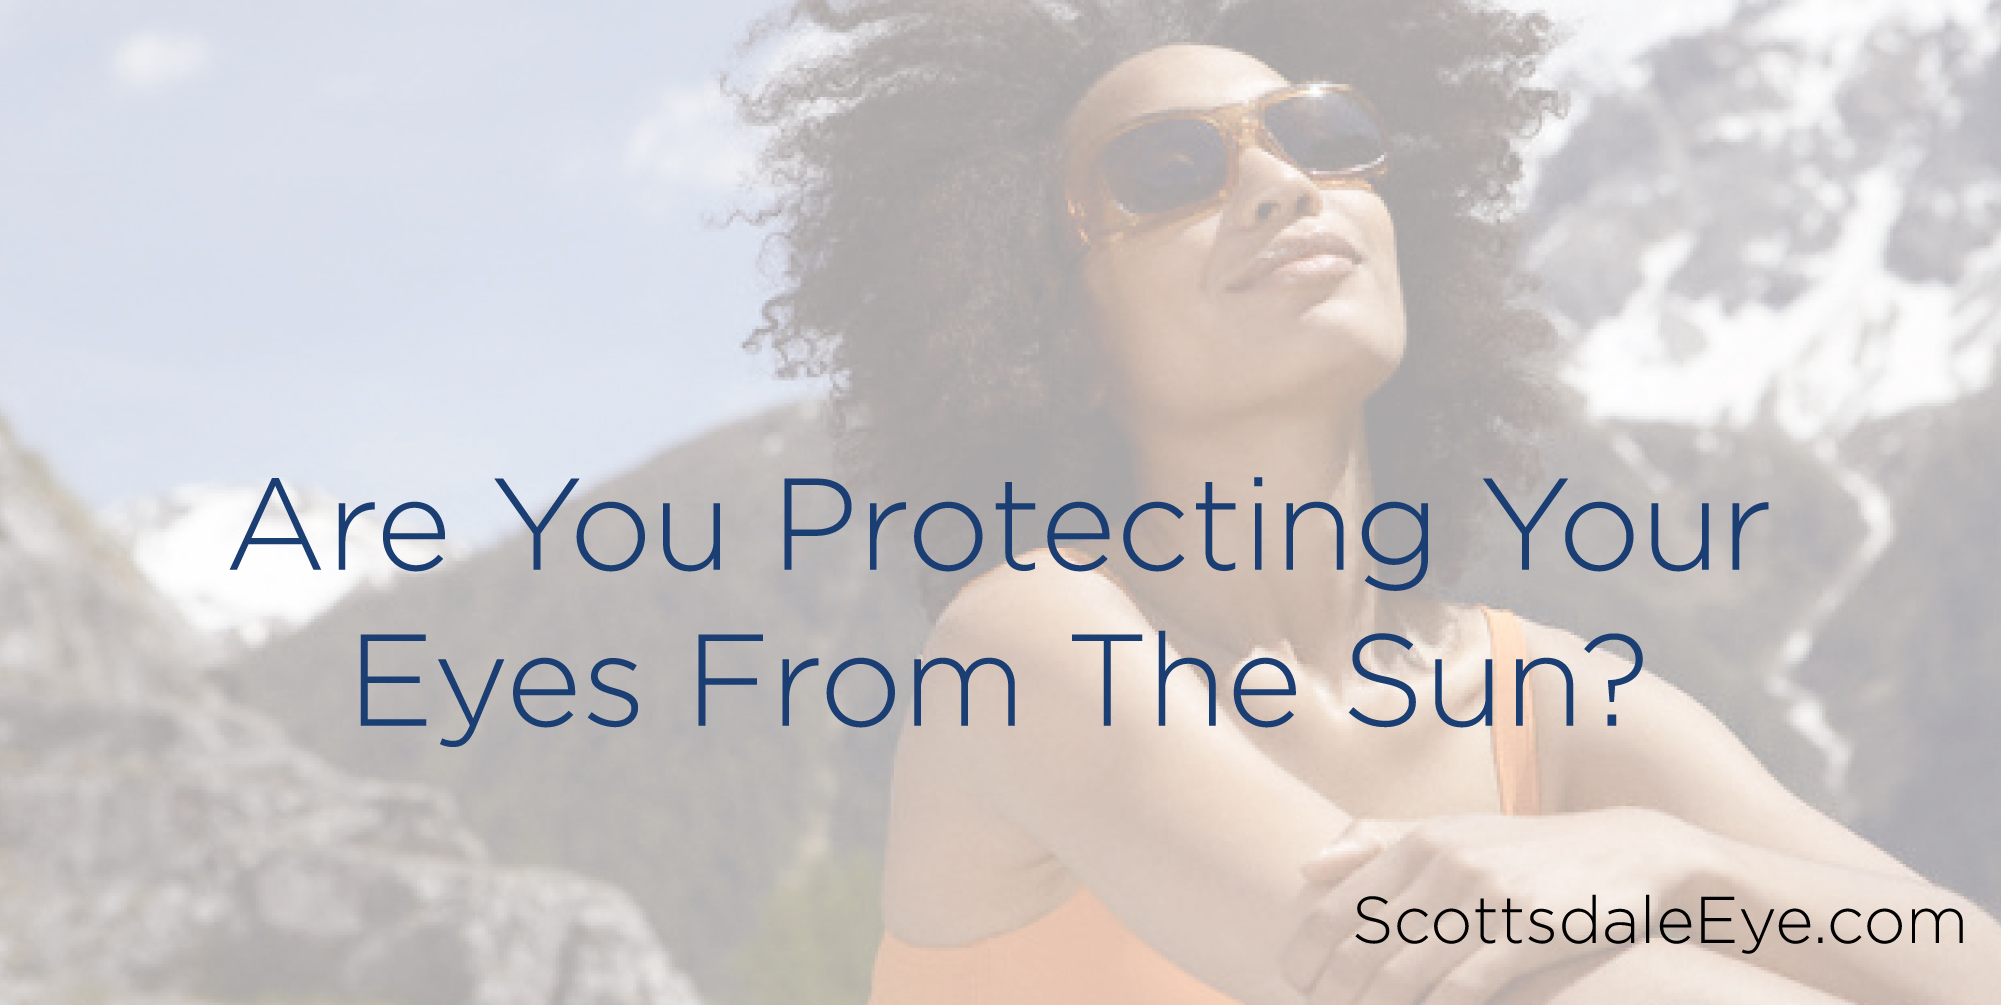 Are You Protecting Your Eyes From the Sun?